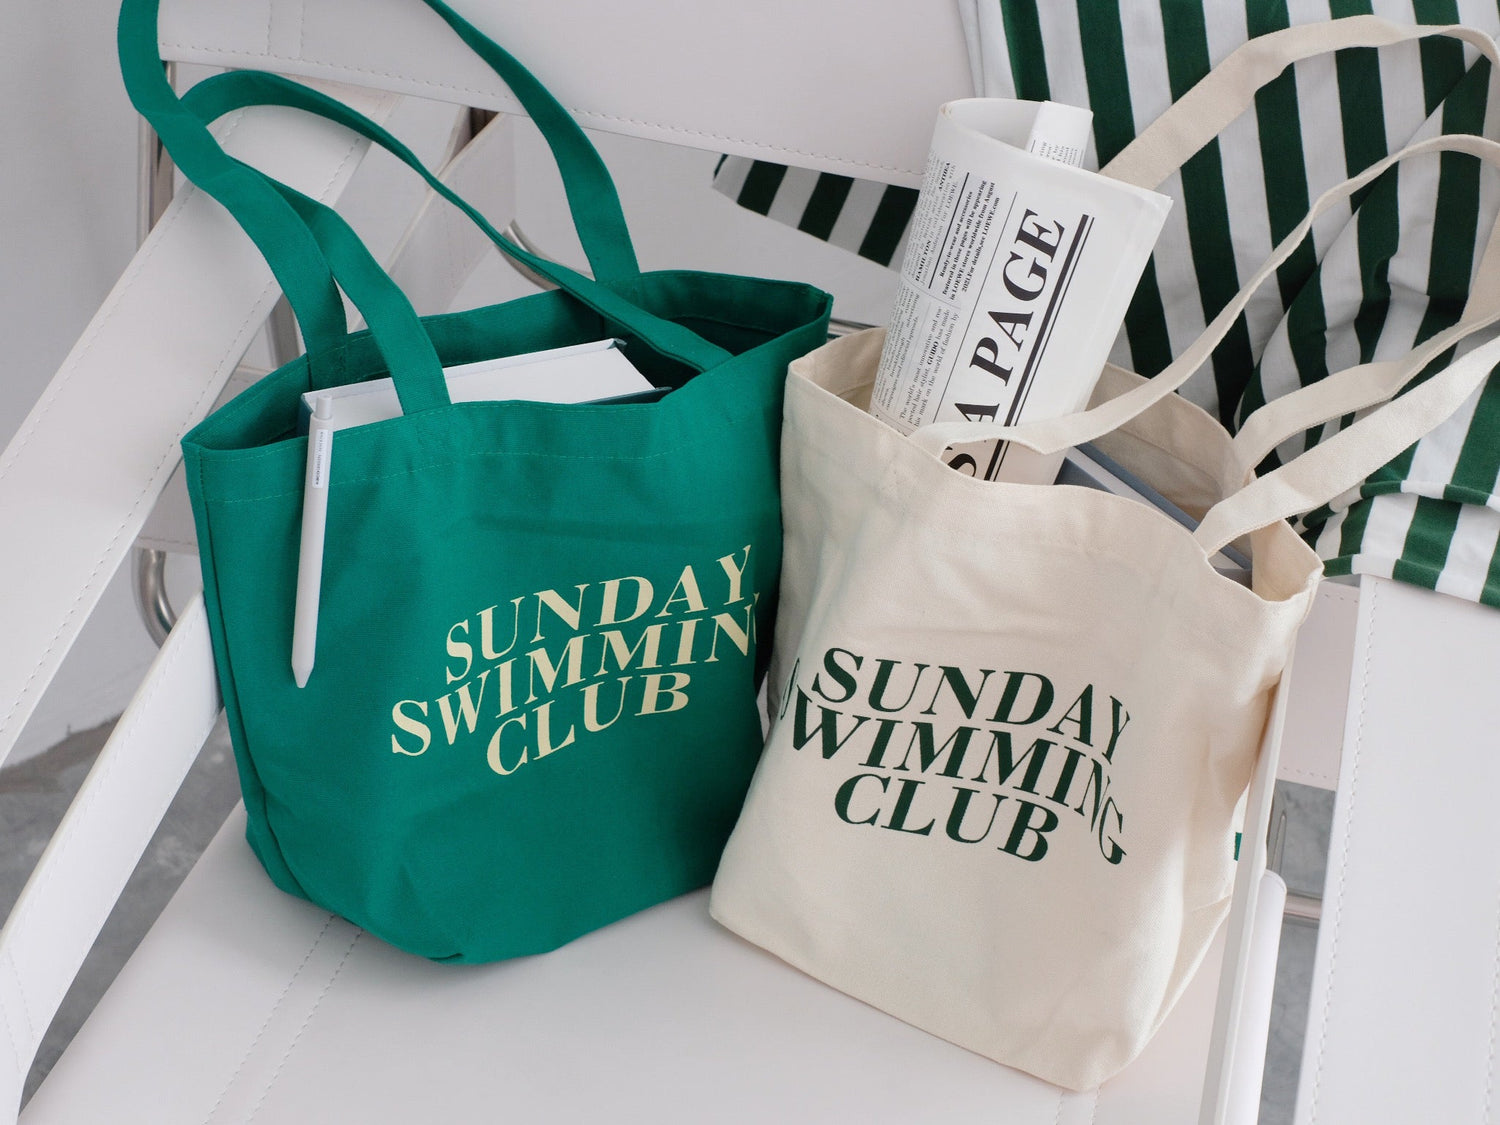 Sunday Tote Green